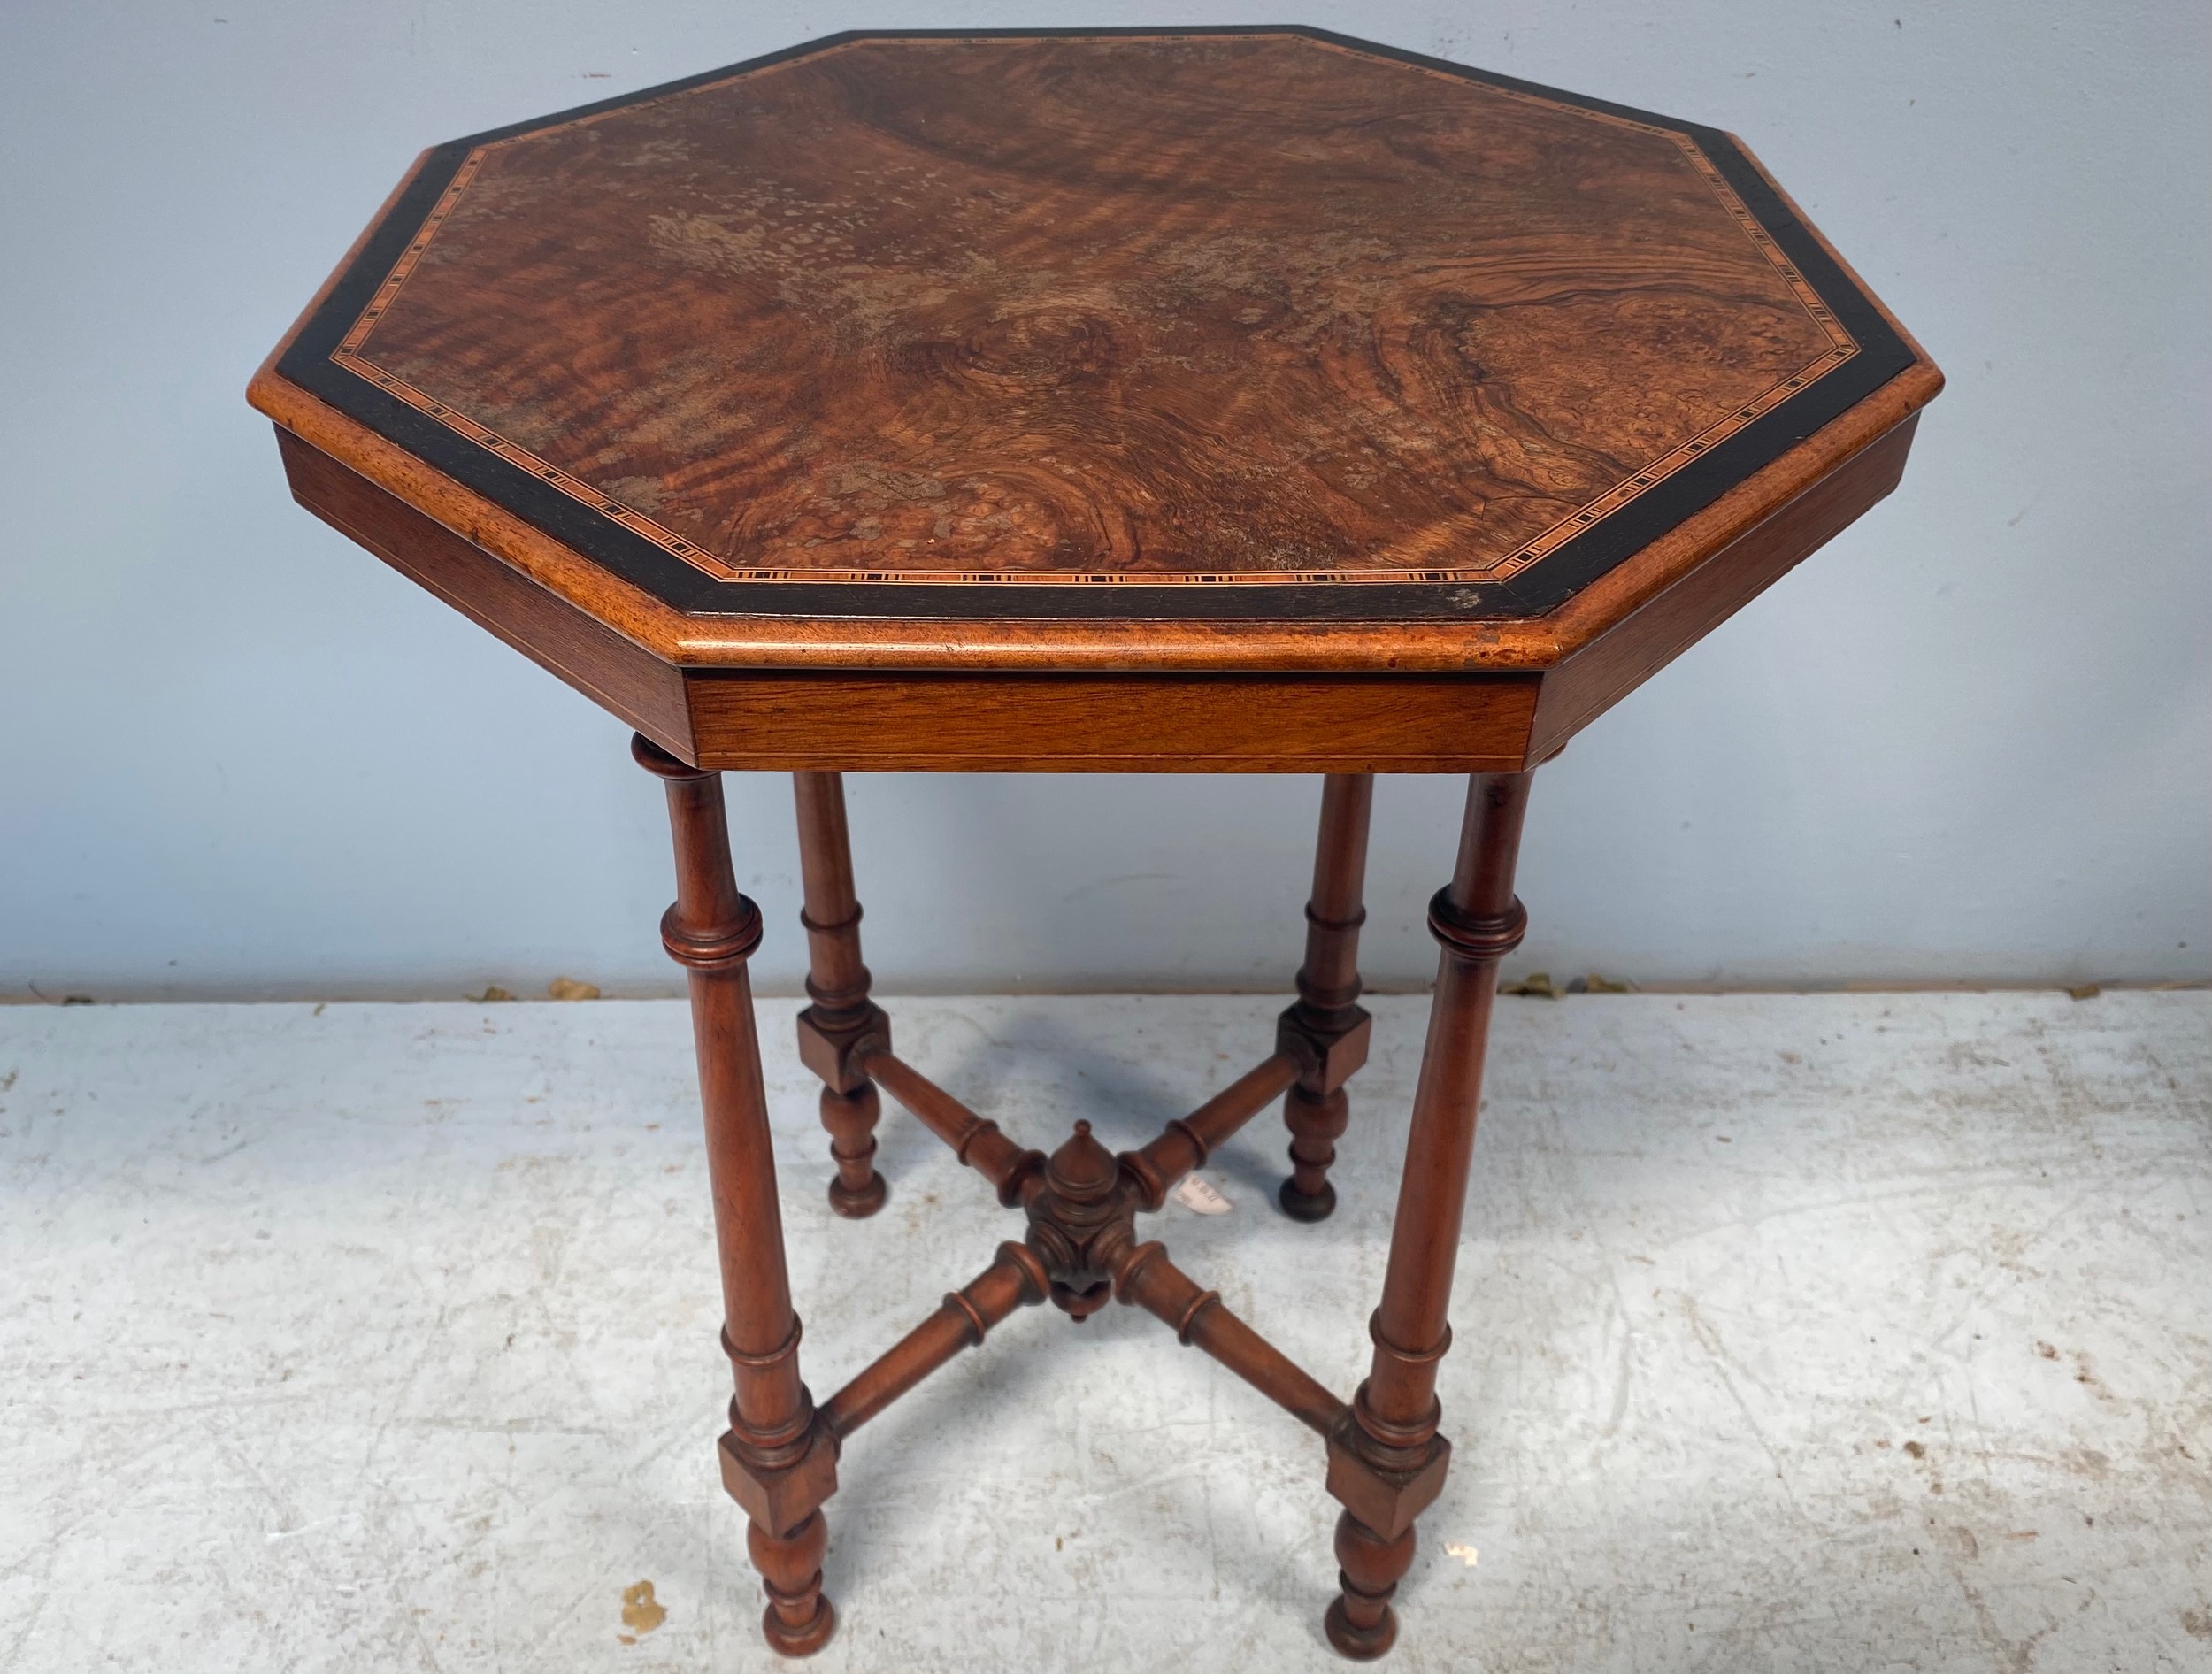 An Edwardian pollard oak veneered octagonal occasional table with central inlaid satinwood, - Image 7 of 7